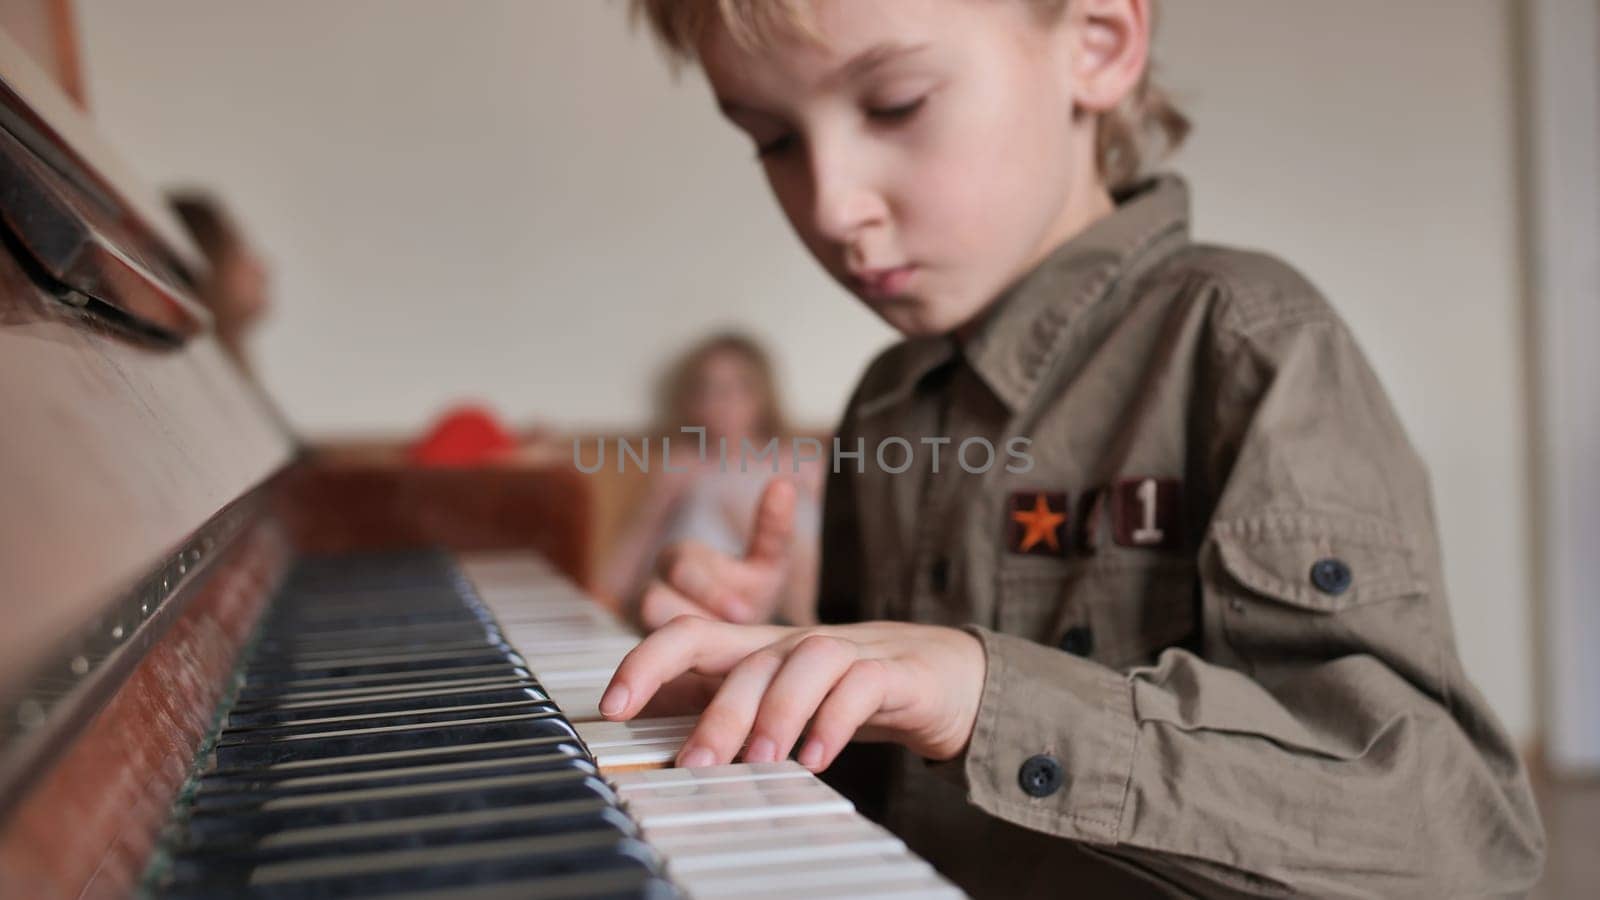 An eight-year-old boy plays the piano at home